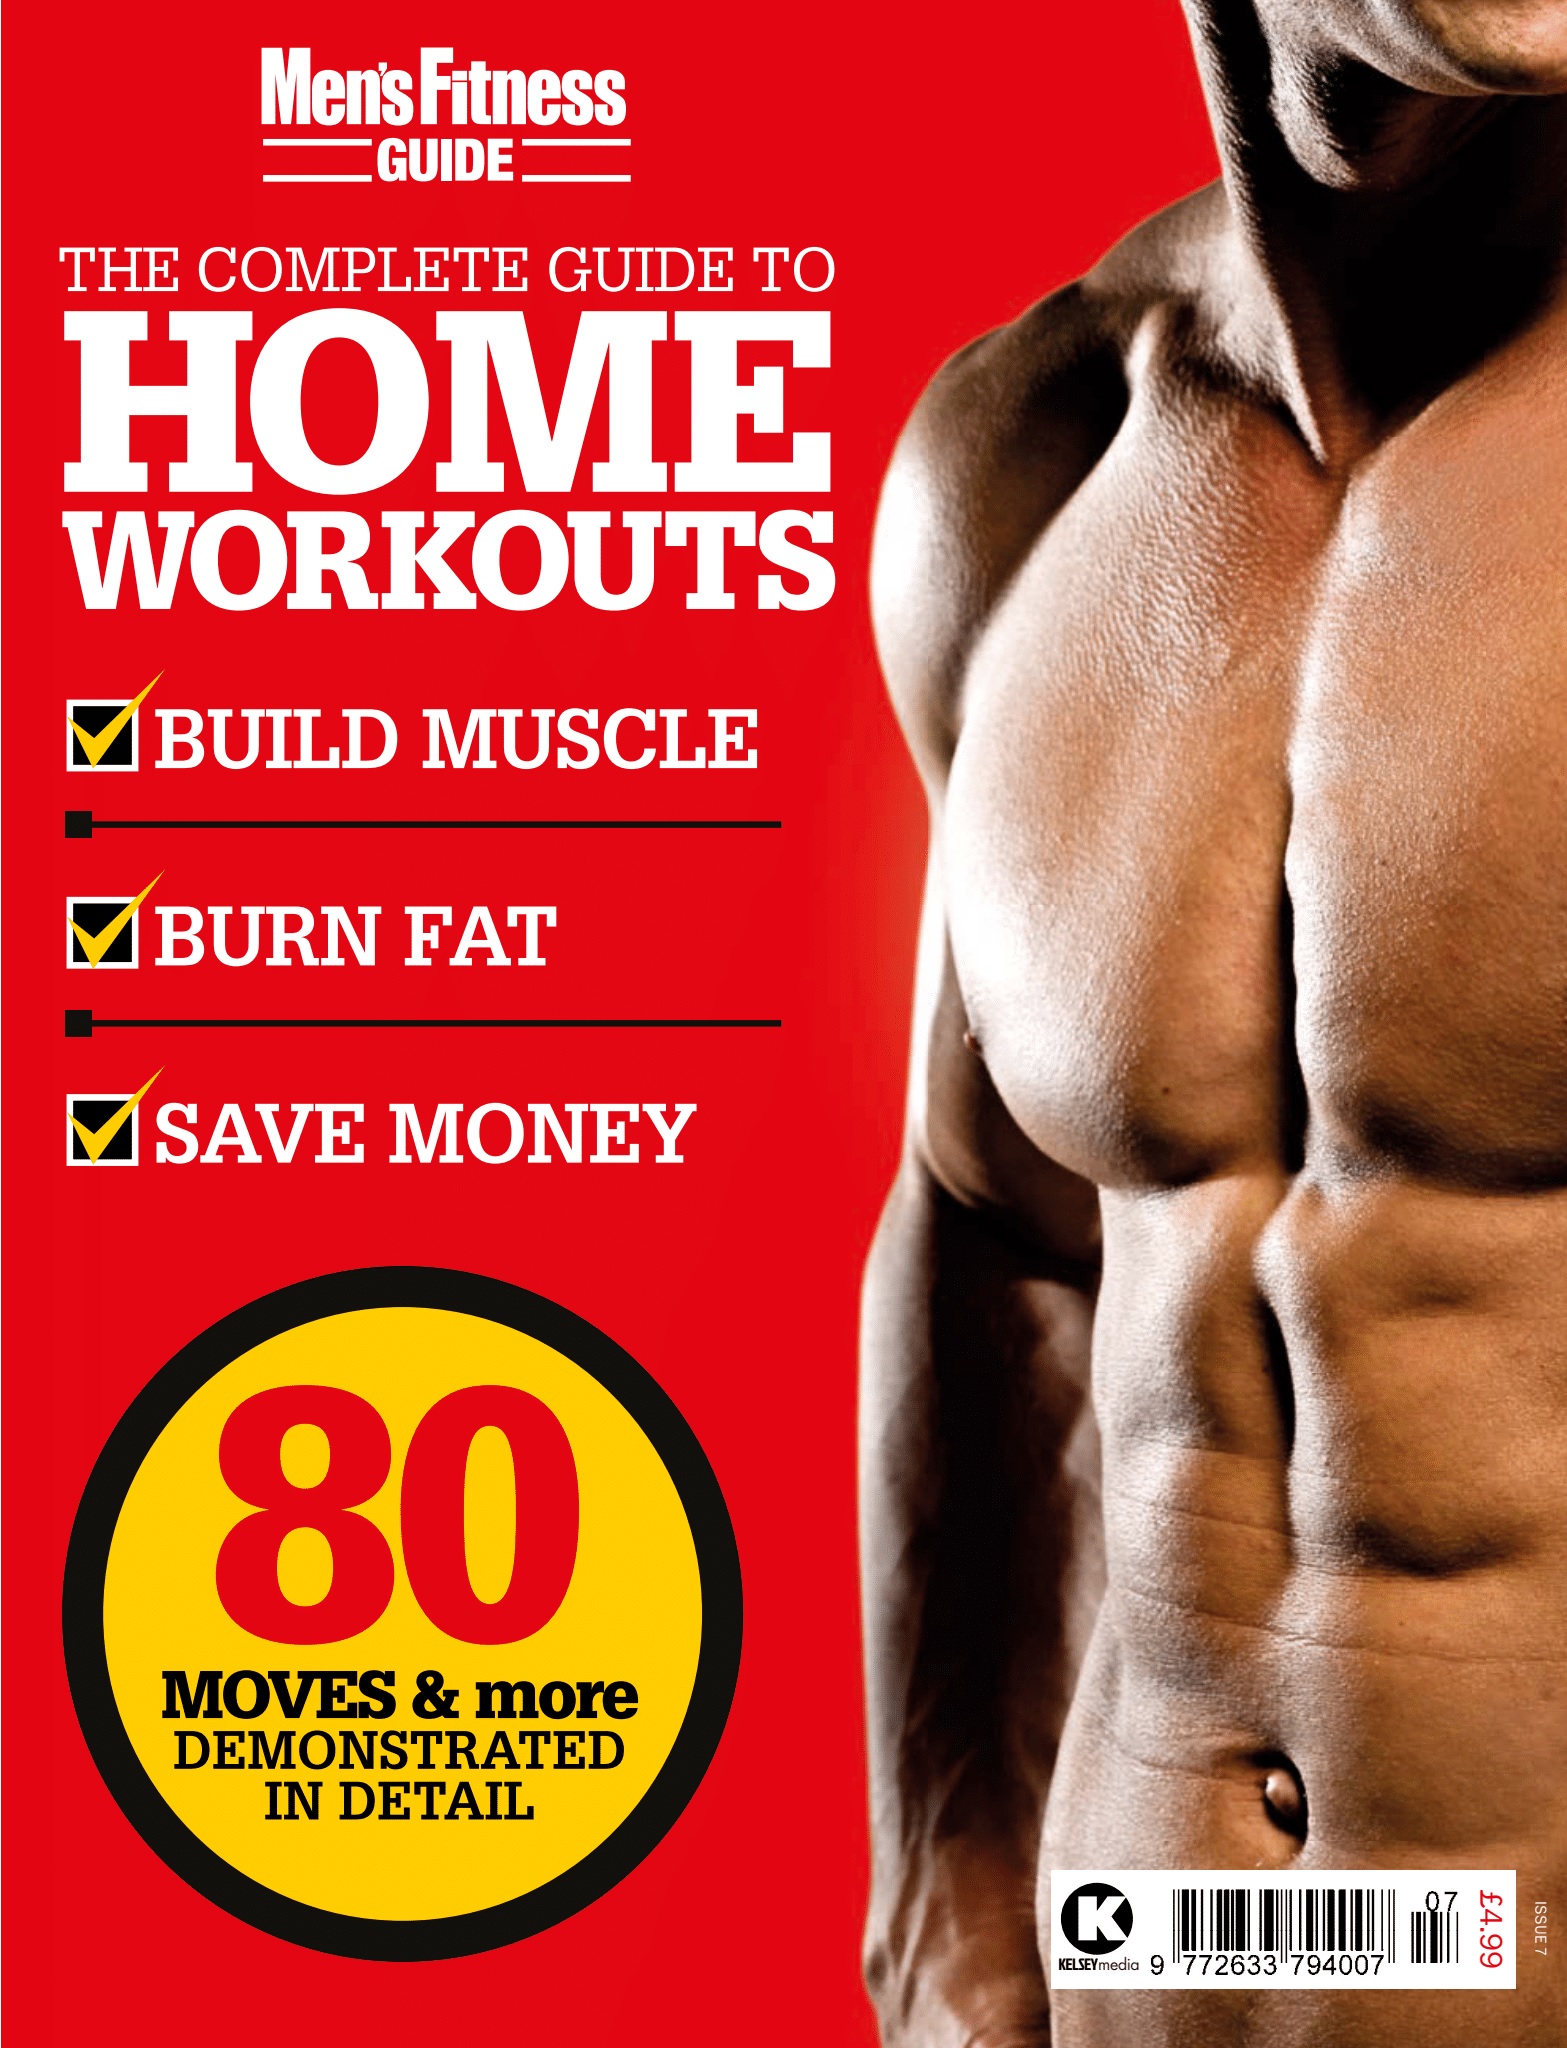 Men's Fitness Guide #7 - Home Workouts